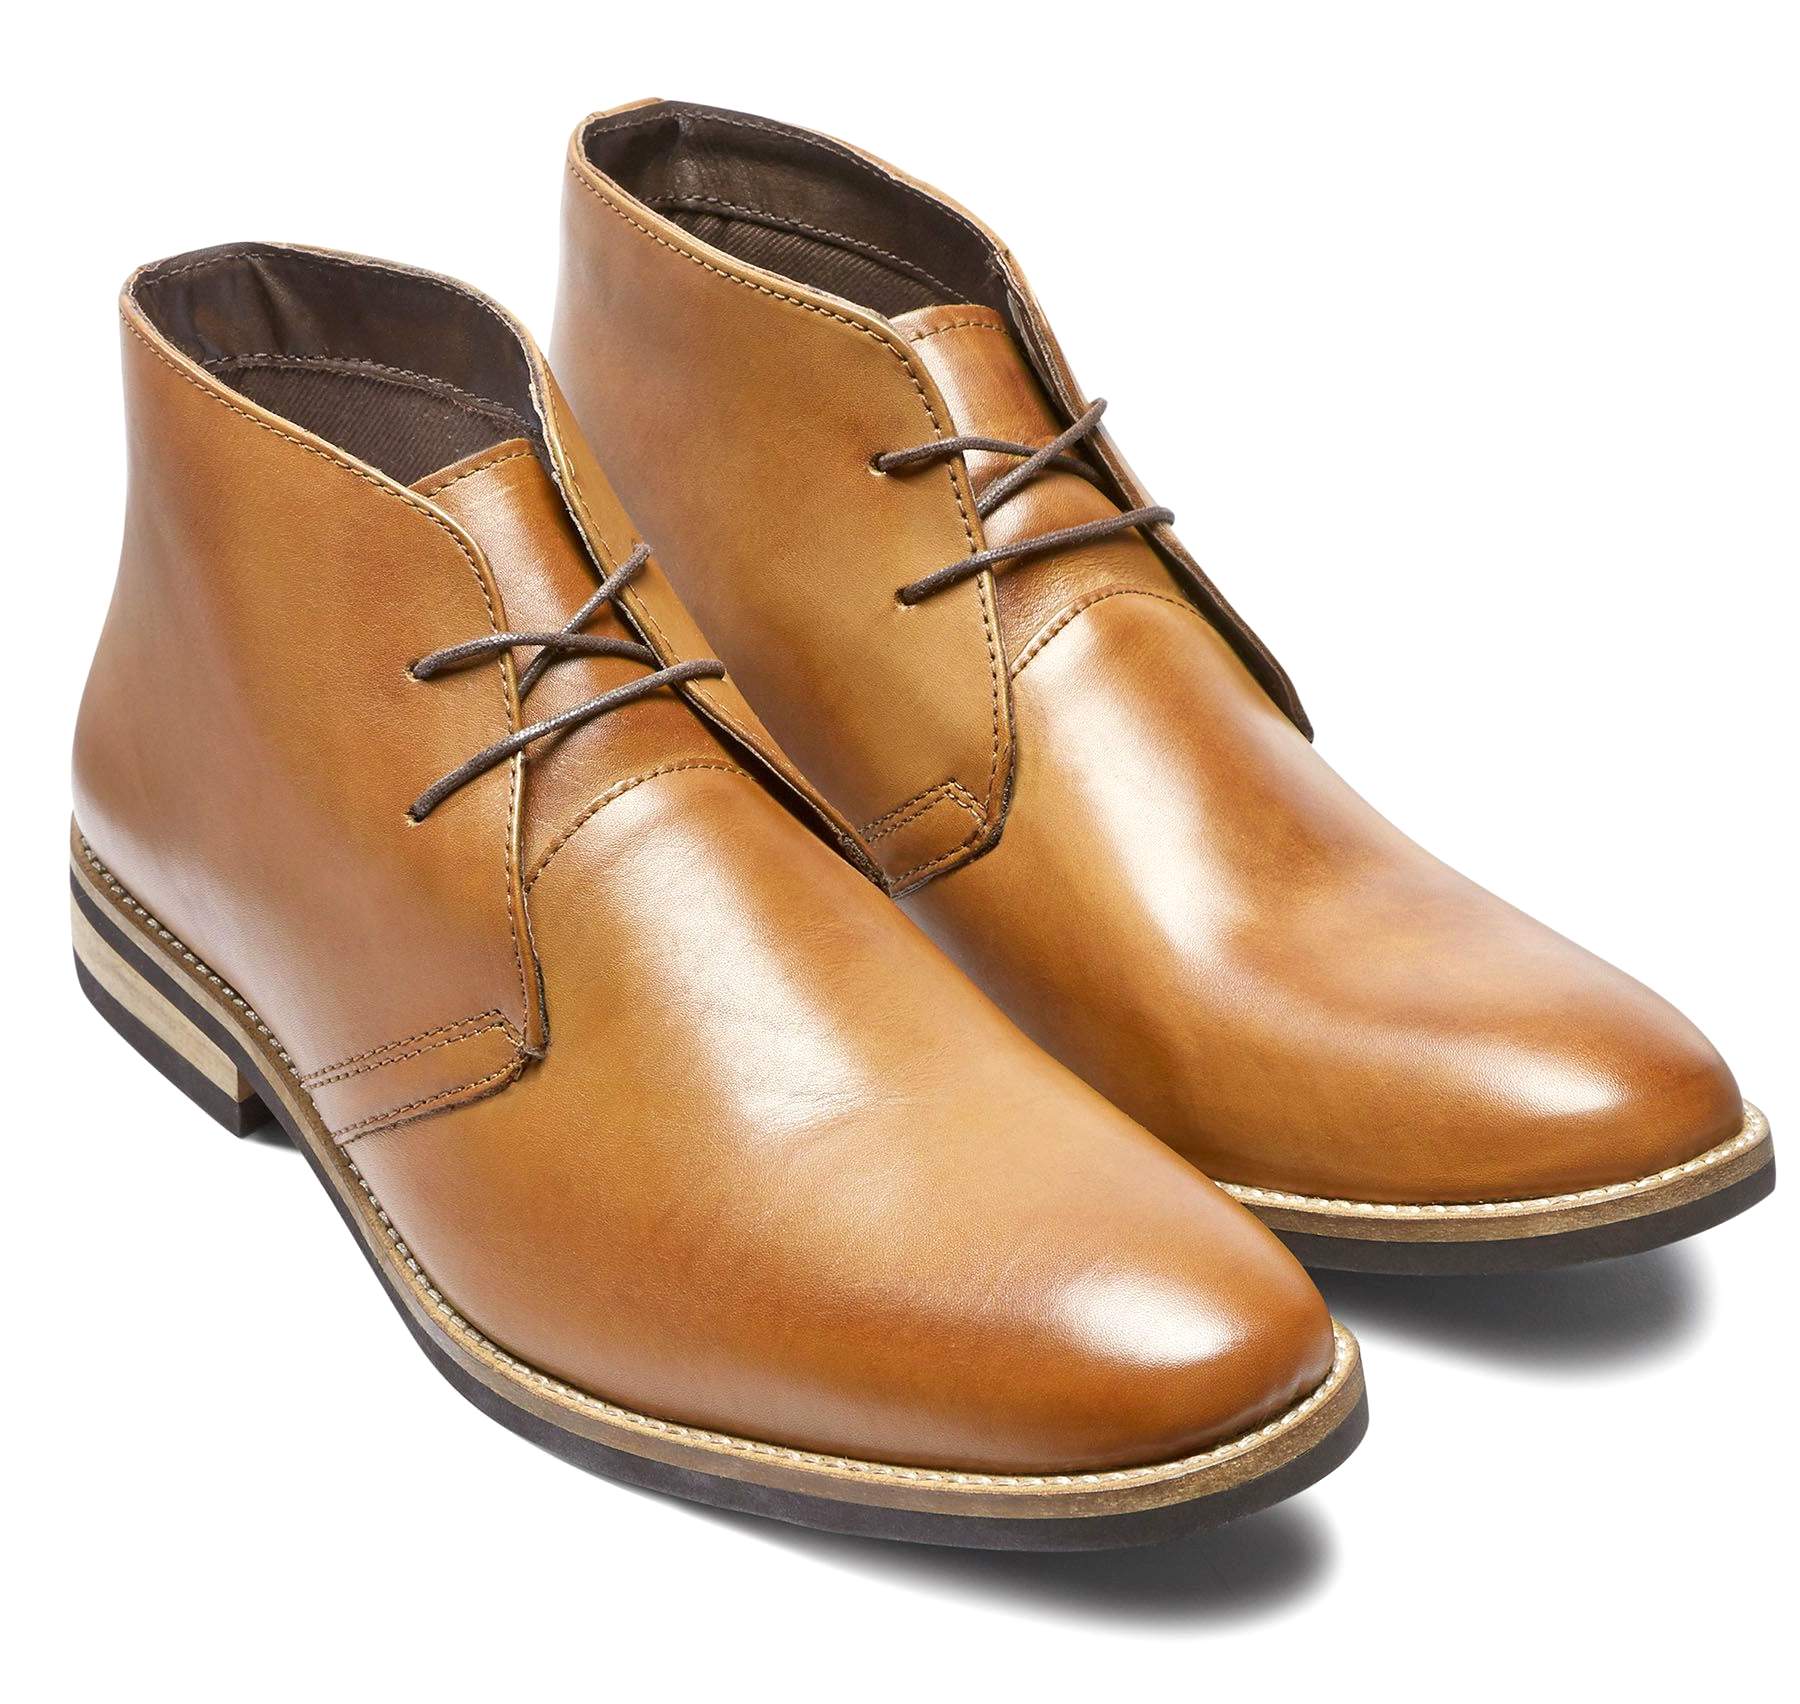 Mens Tan Leather Lace Up Chukka Ankle Boots | eBay